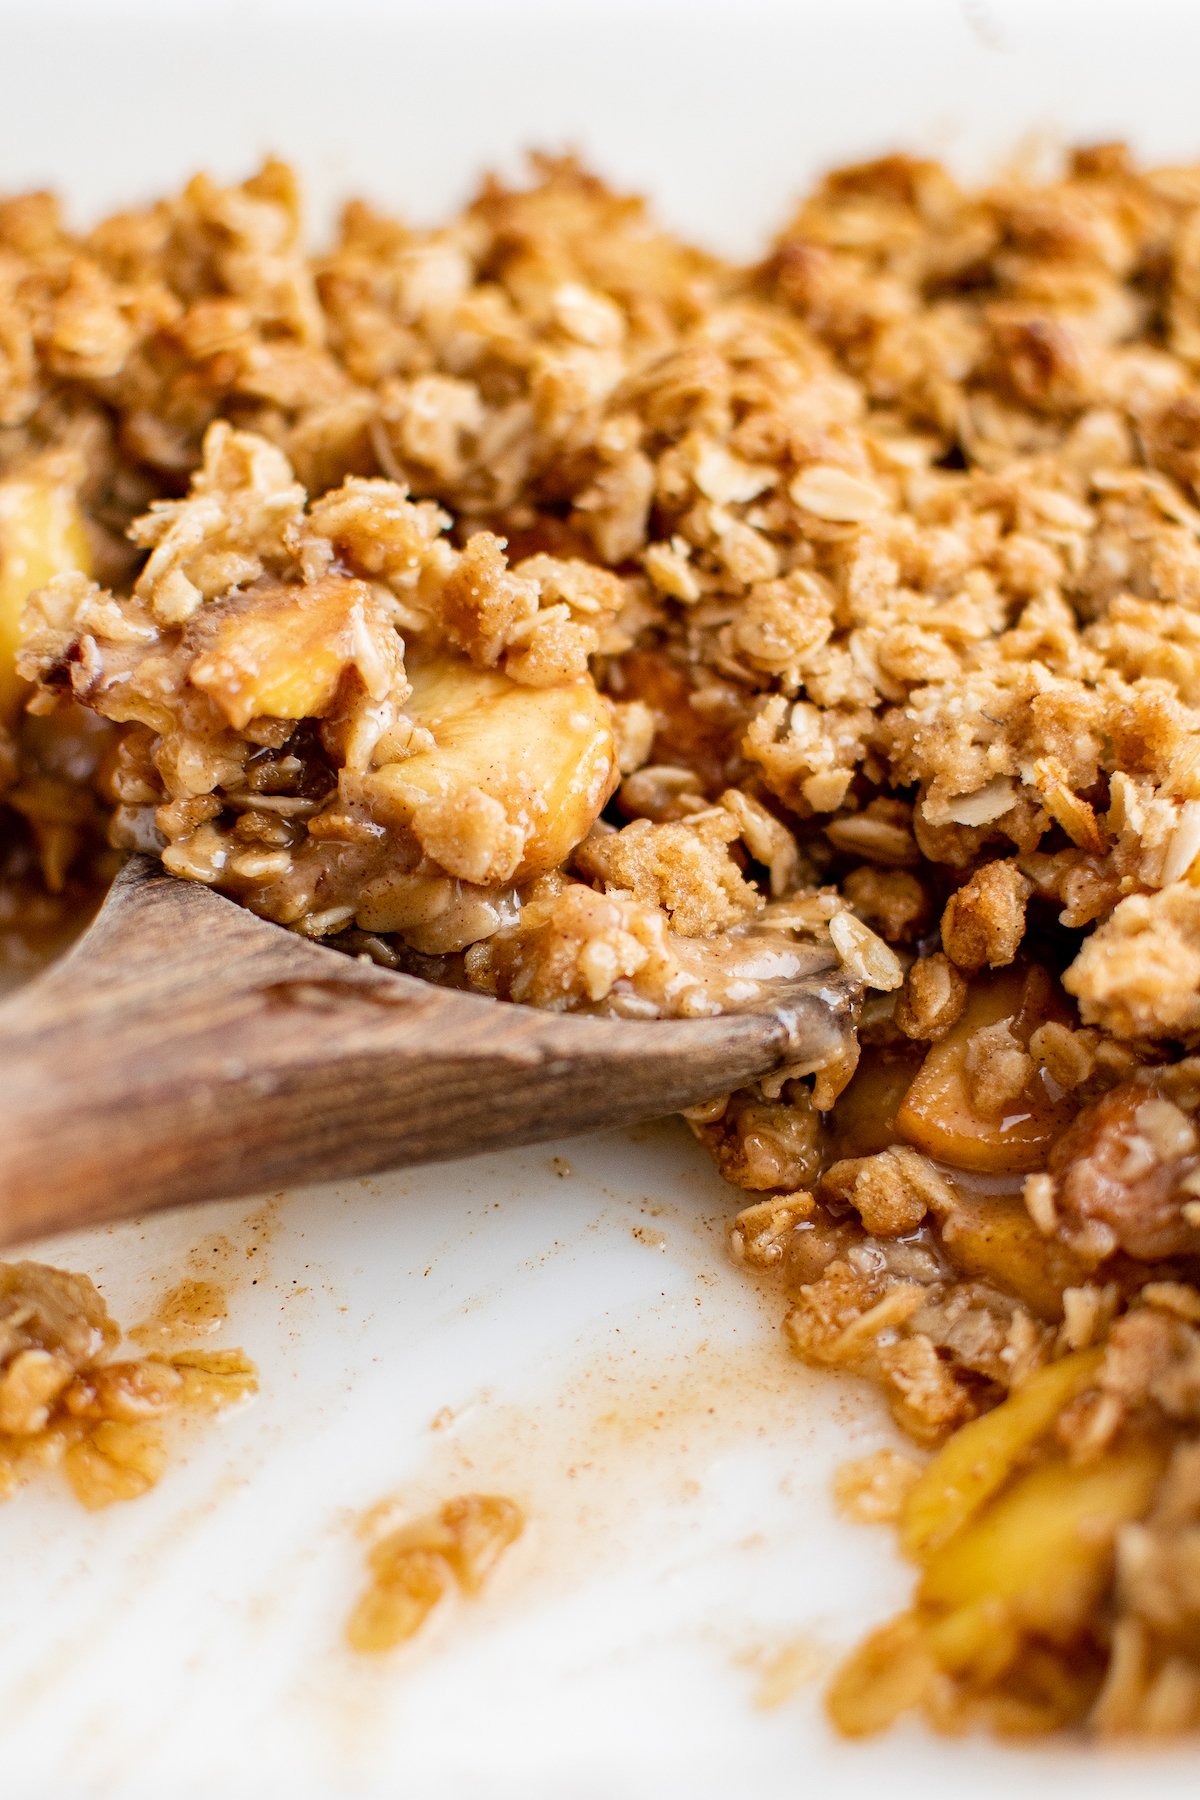 A wooden spoon digging into a baked peach dessert with oat topping.